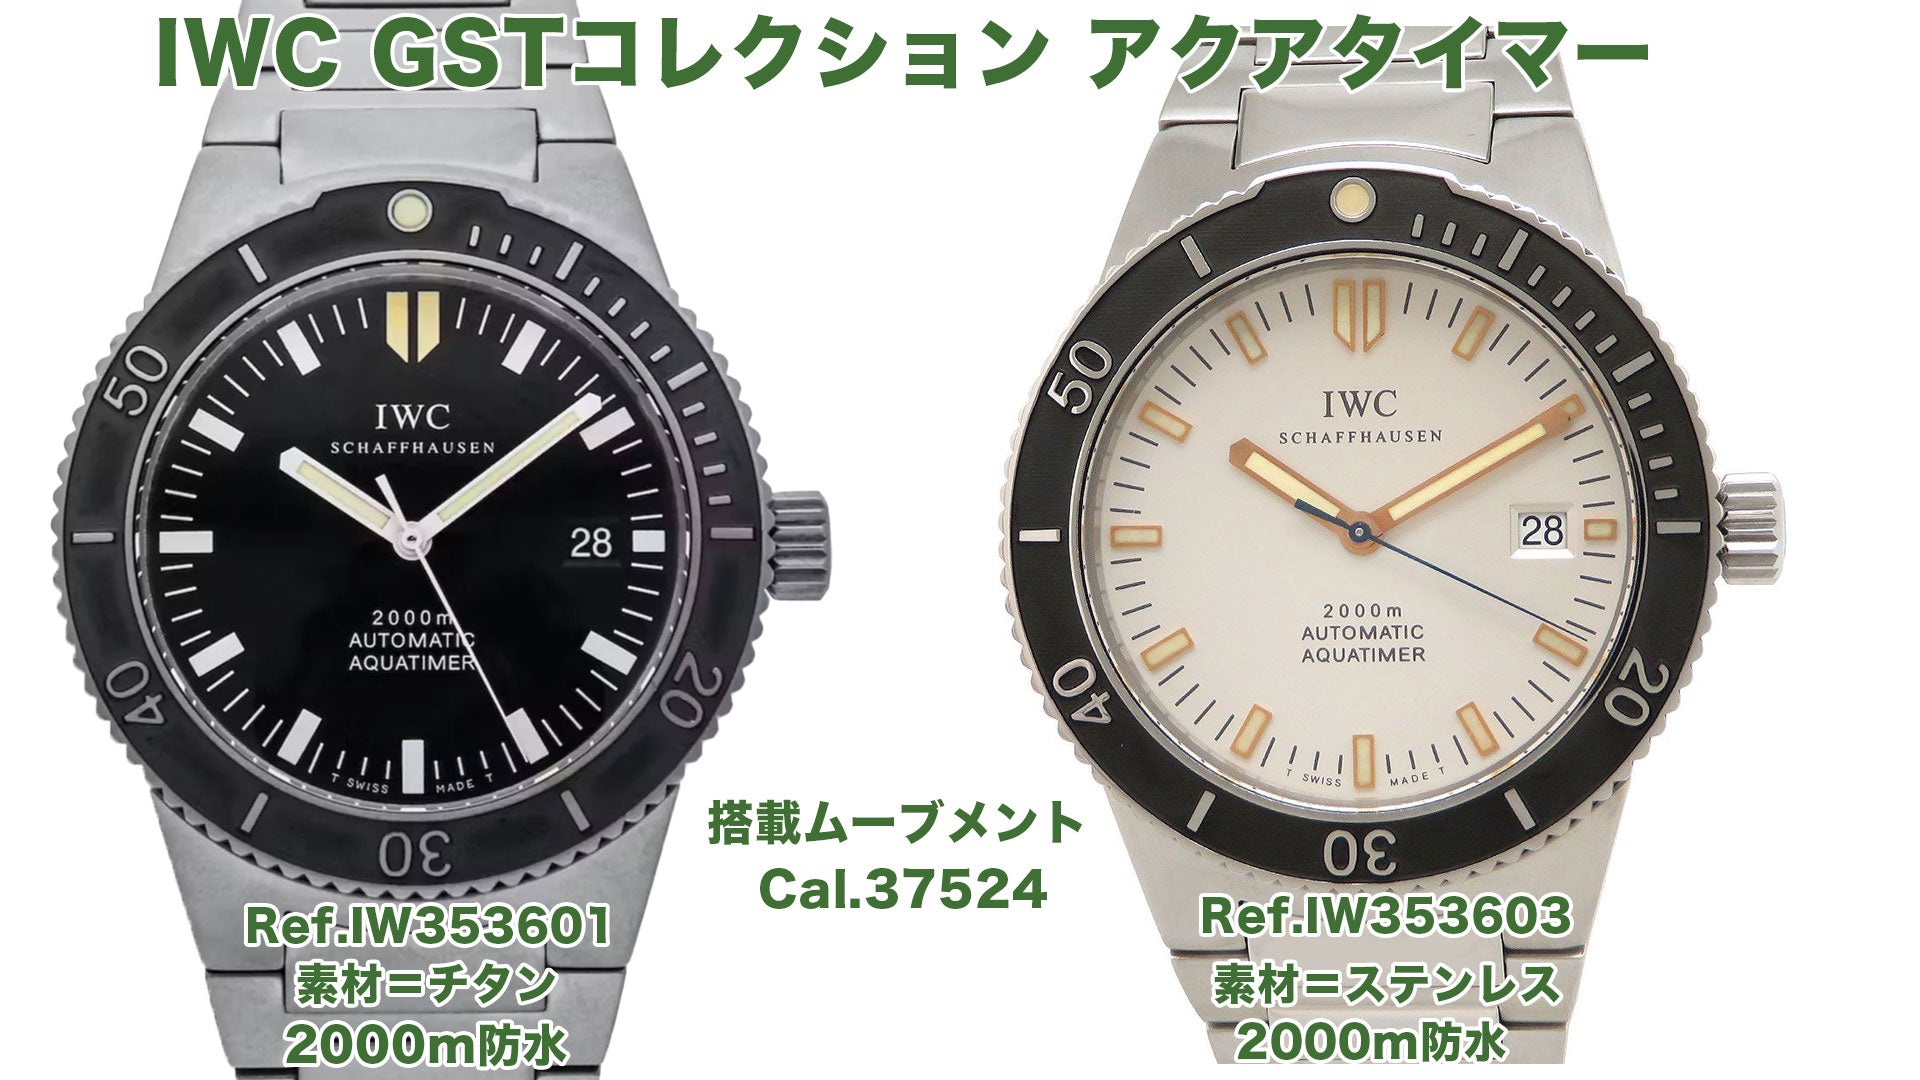 IWC GST Collection Aquatimer Ref. IW353601 and IW353603